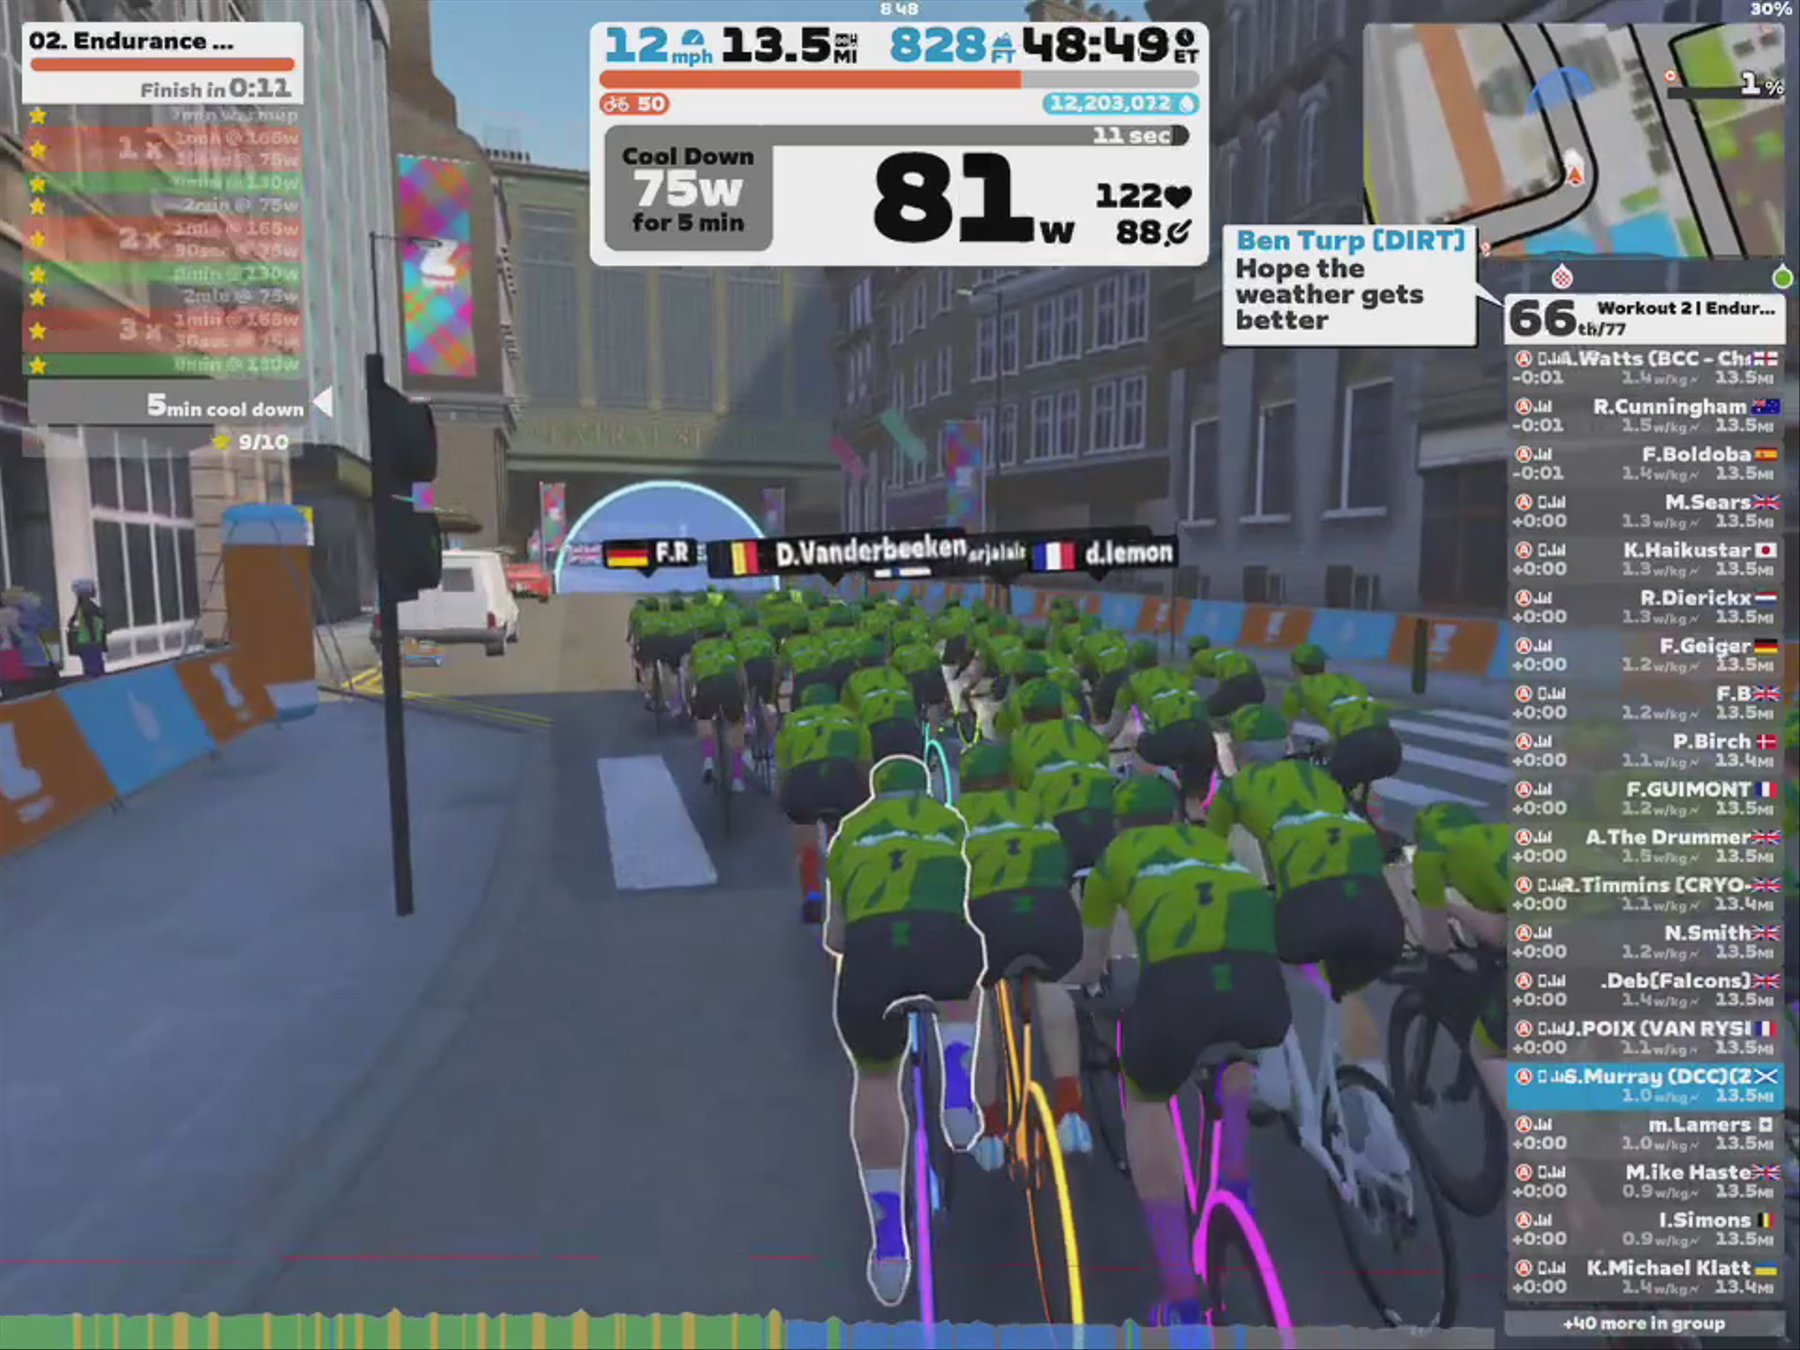 Zwift - Group Workout: Long - Endurance Escalator  on The Muckle Yin in Scotland